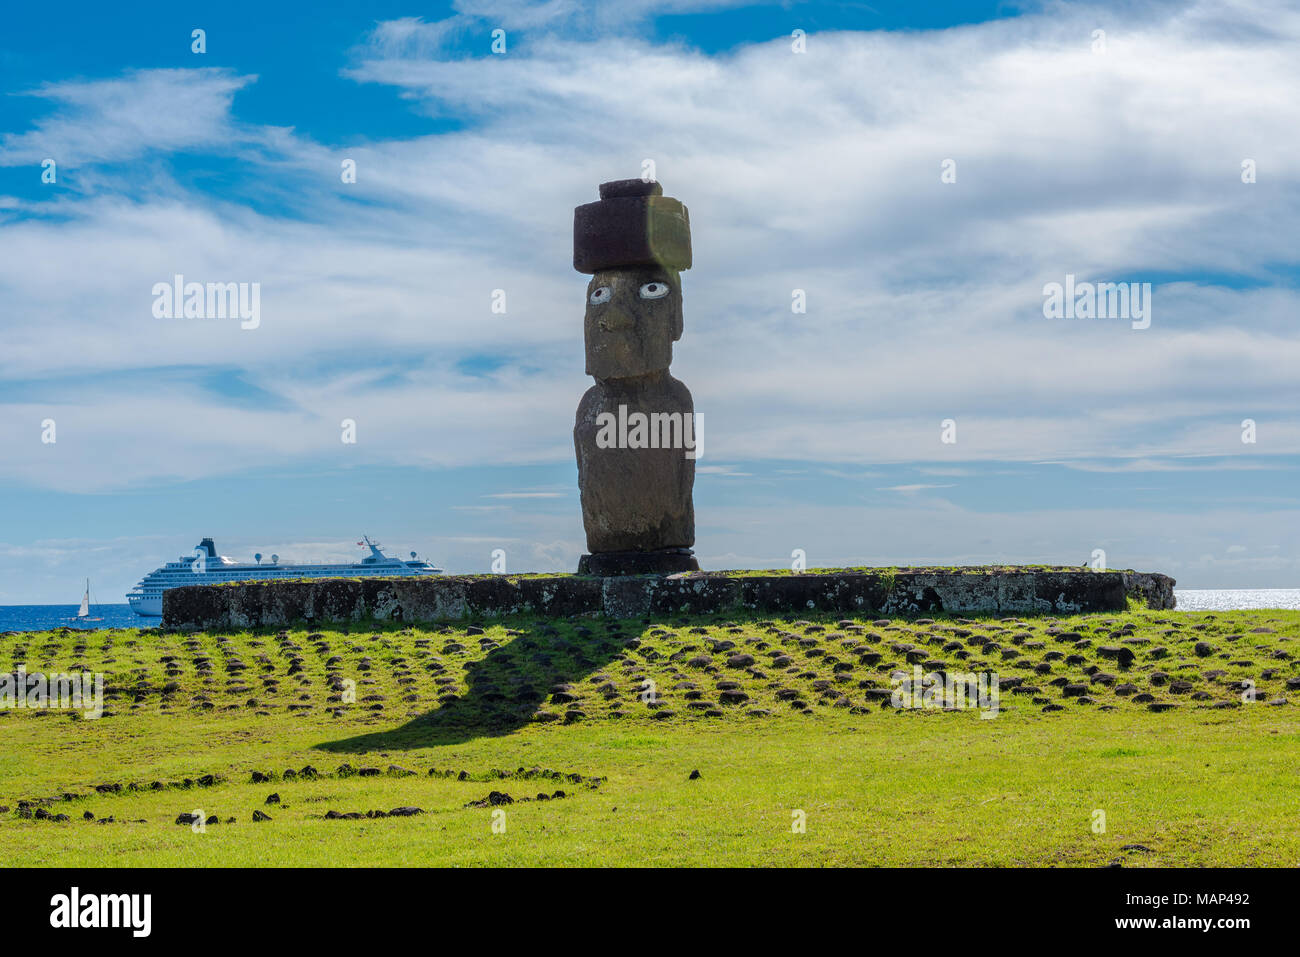 A large Moai statue with open eyes sits on top of an altar. A cruise ship is in the background. Editorial Use Only. Stock Photo